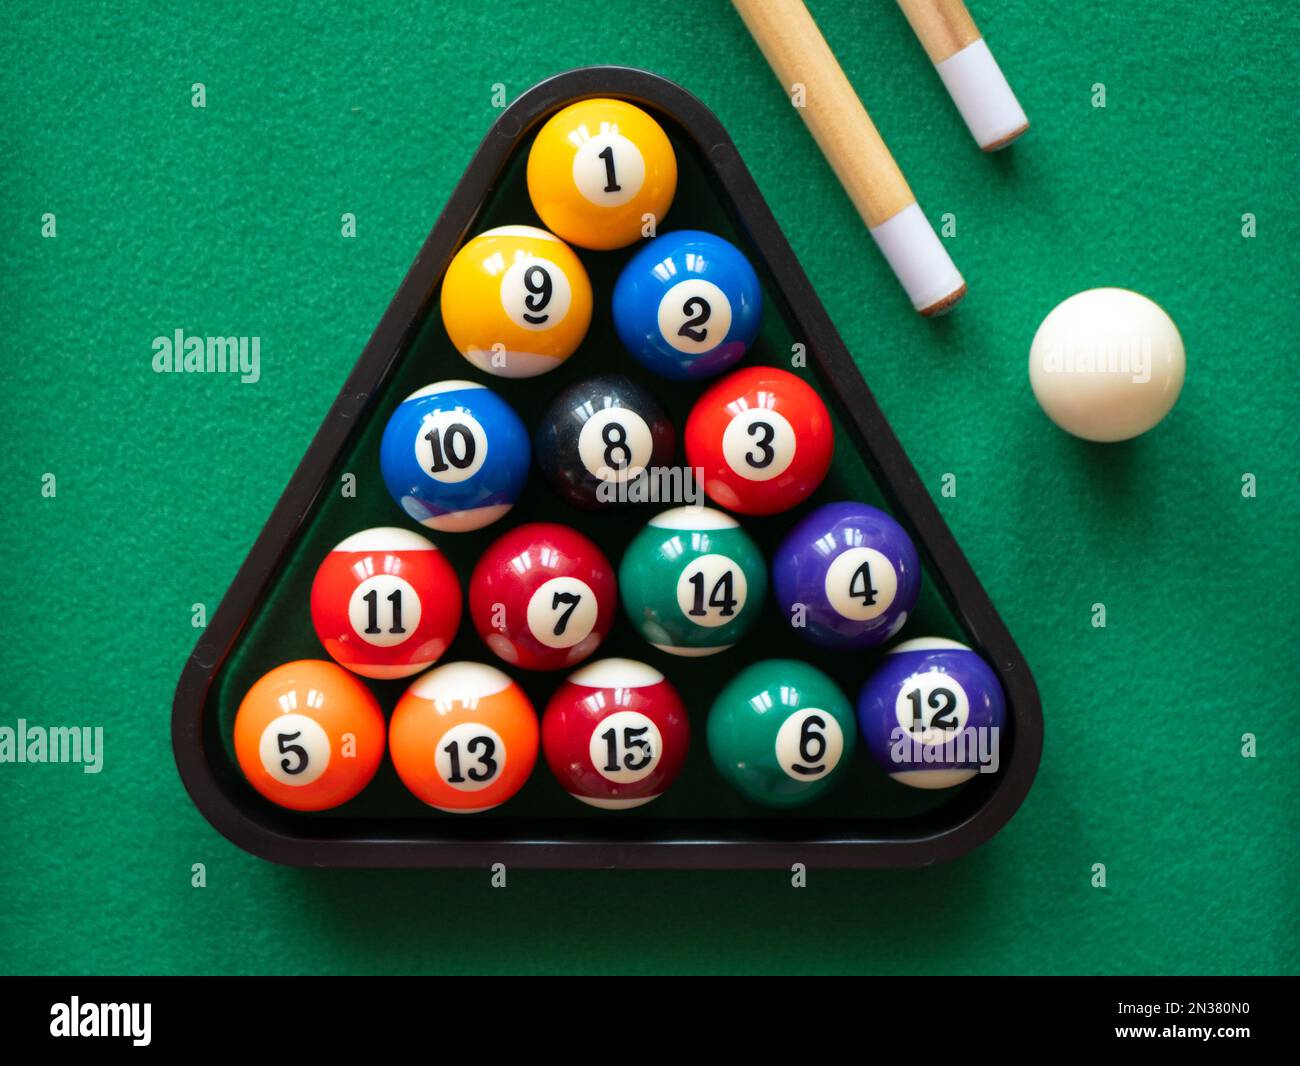 Spots and stripes balls in triangle, cue ball and two cues on the green table, selective focus. Mini billiard, pool or snooker Stock Photo